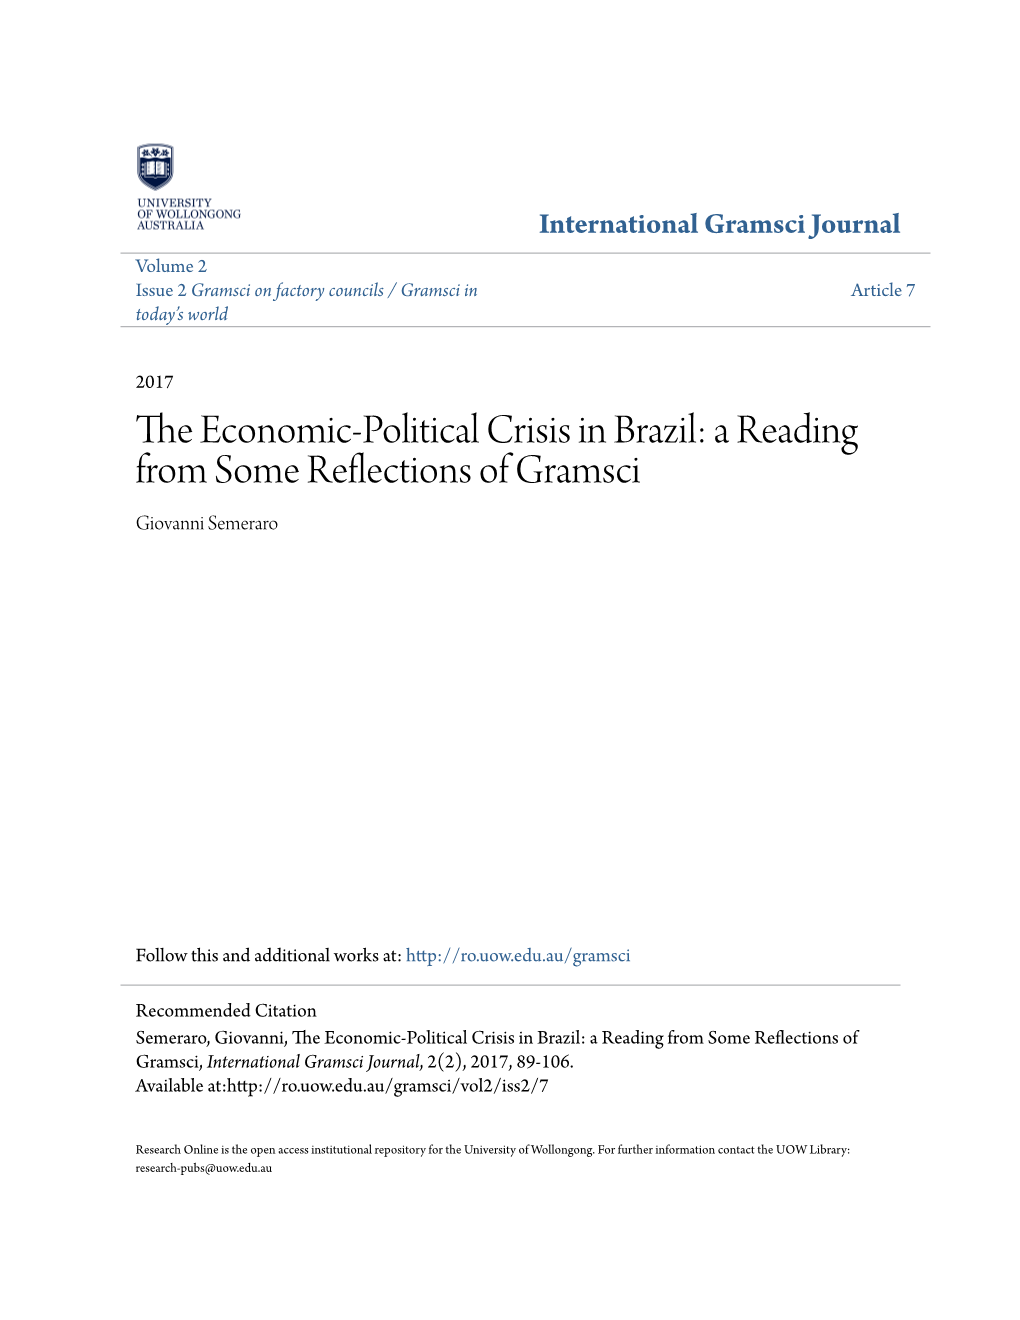 The Economic-Political Crisis in Brazil: a Reading from Some Reflections of Gramsci